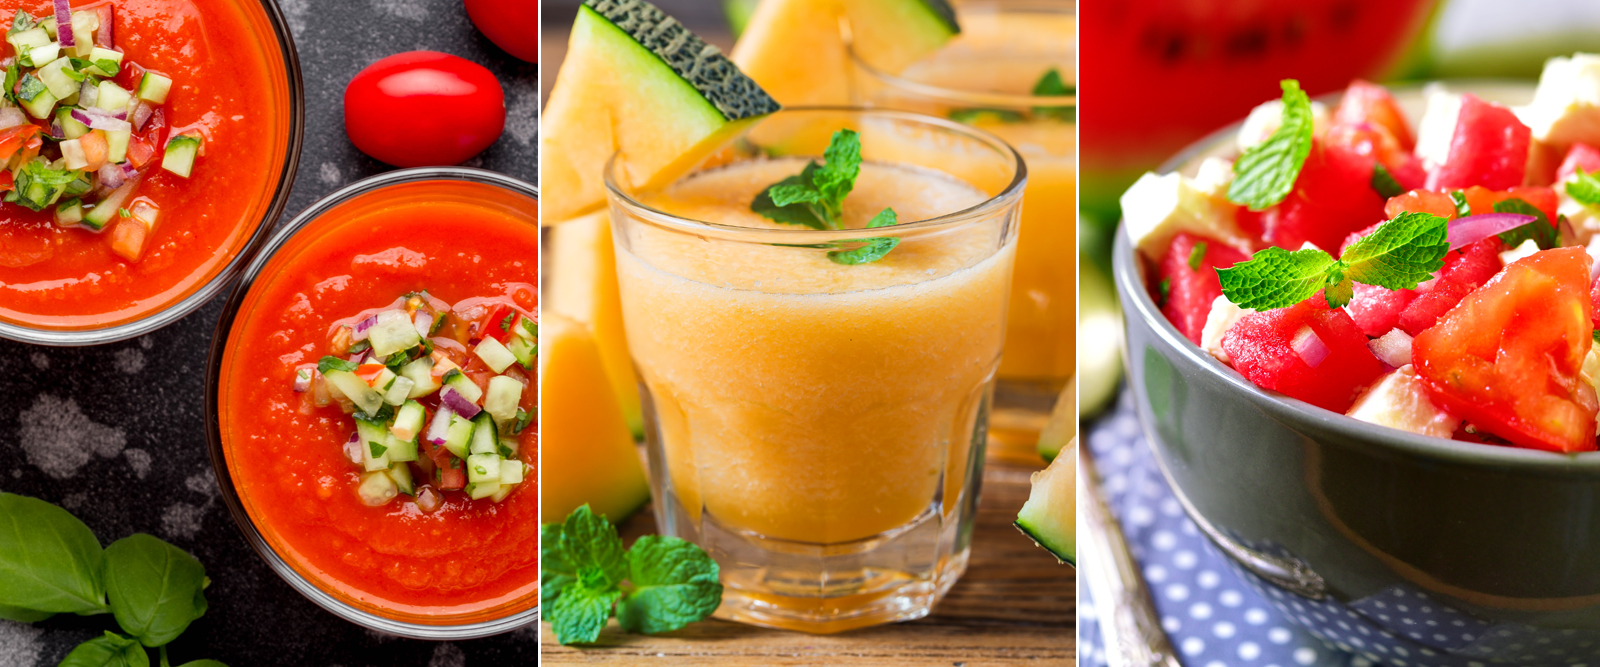 healthy summer recipes - gazpacho, smoothie and watermelon and feta salad